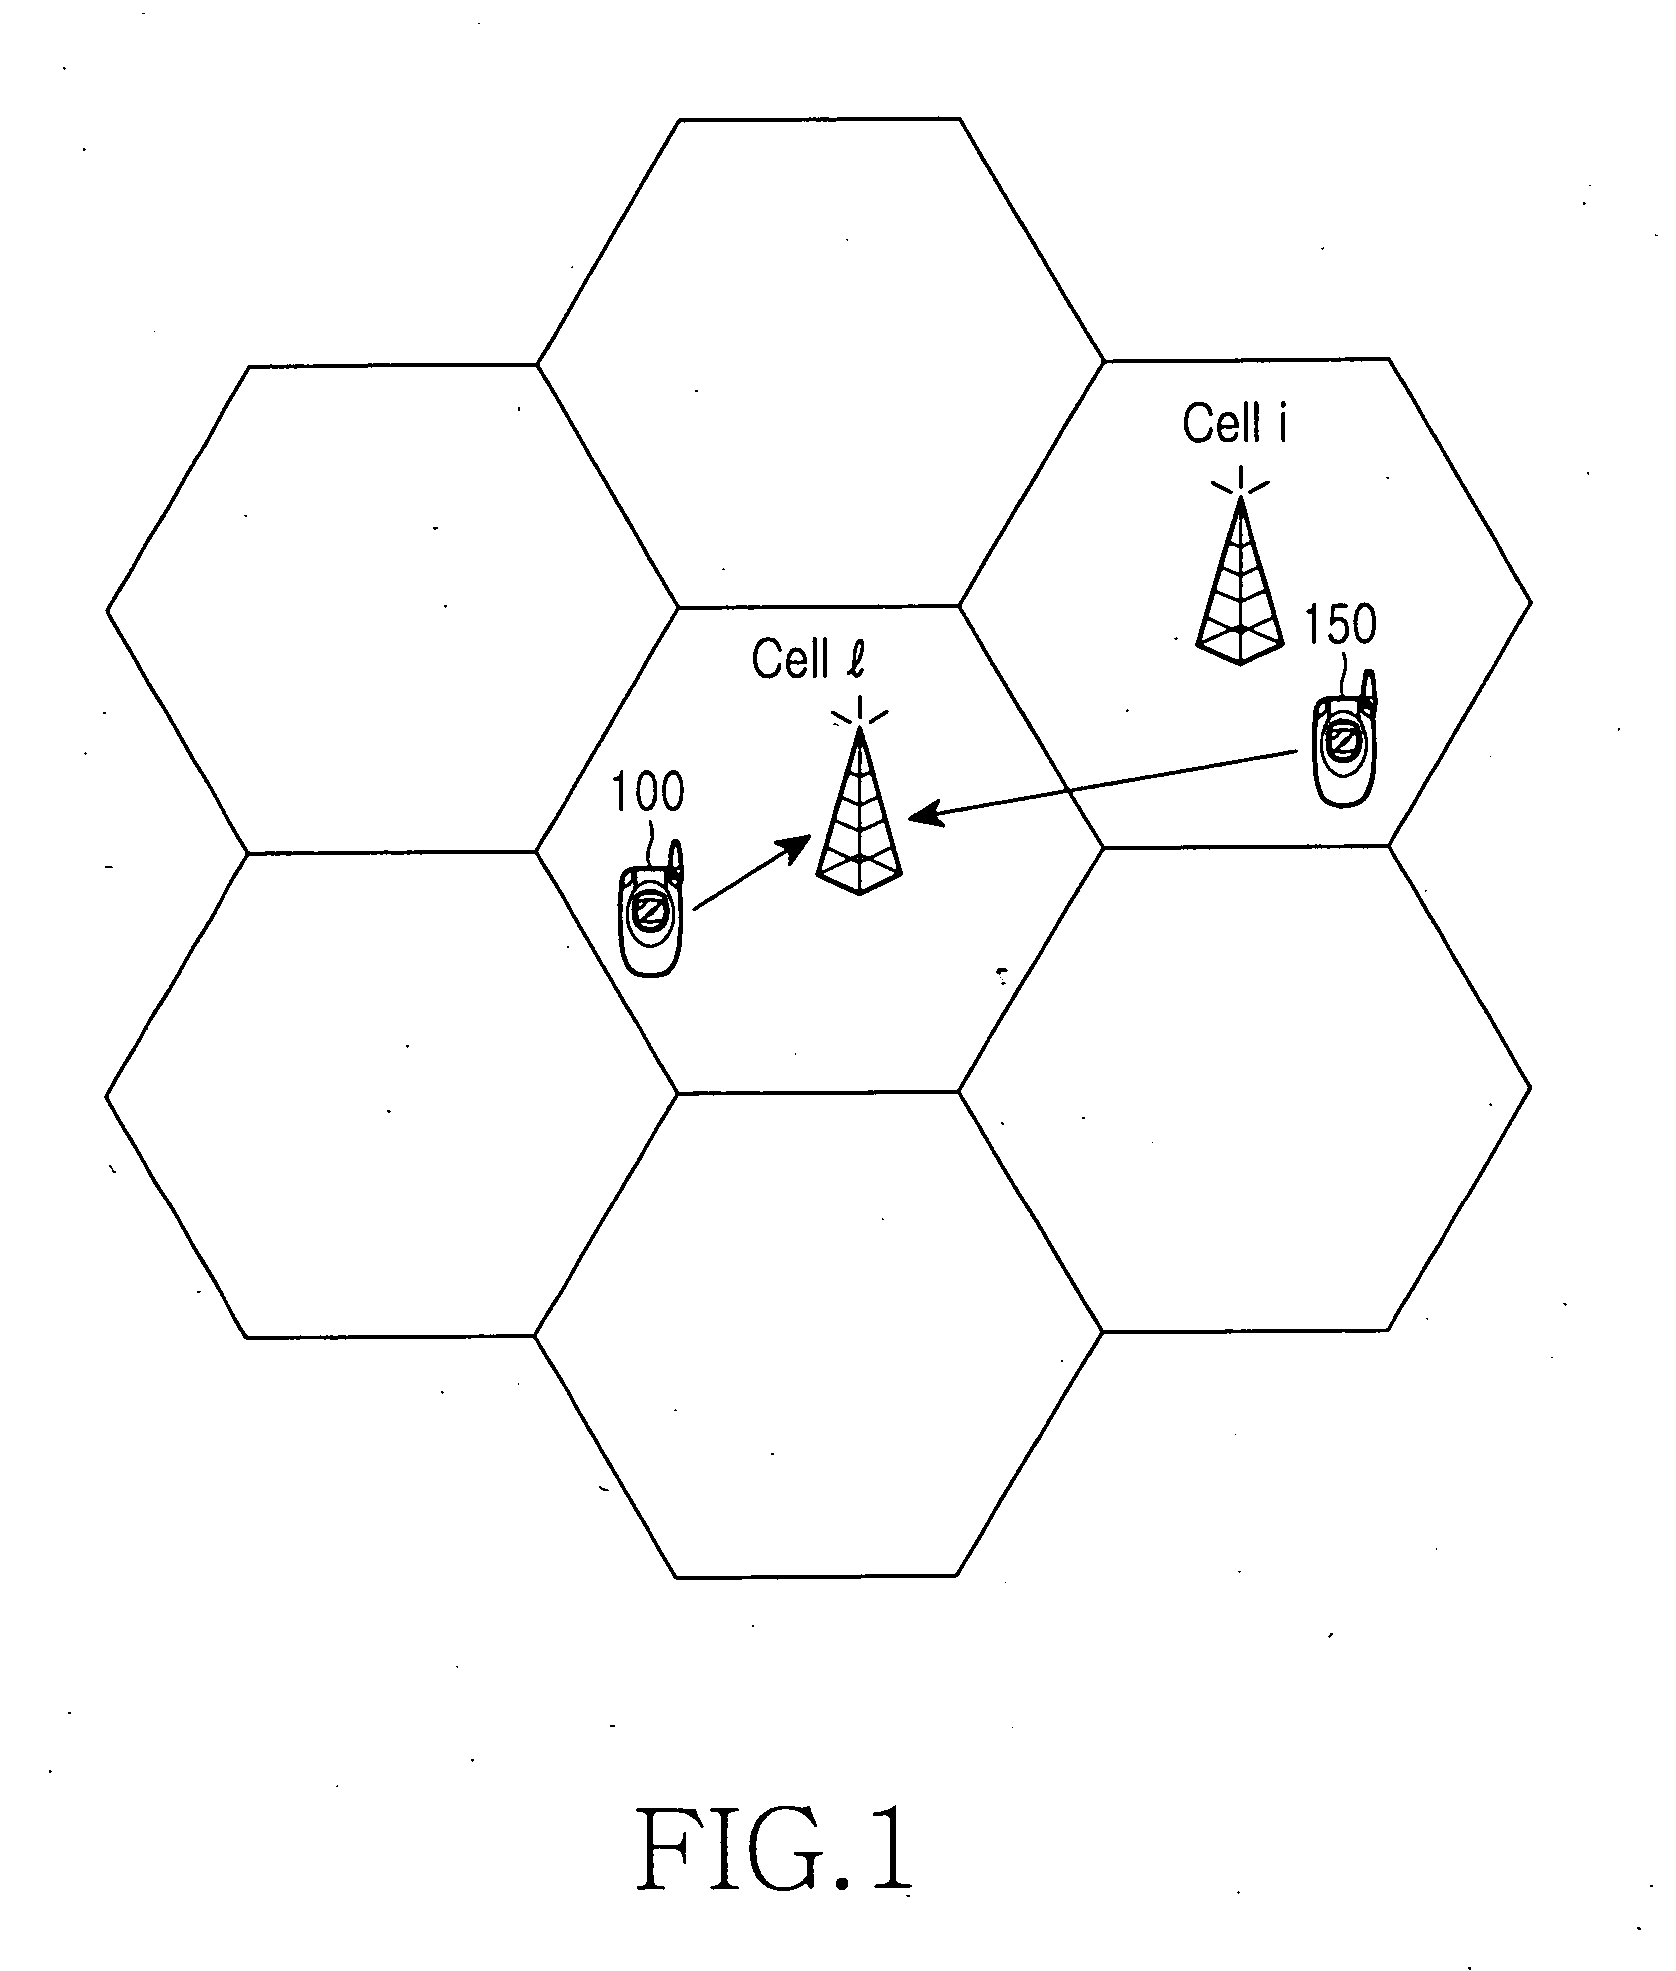 Method for uplink scheduling in communication system using frequency hopping-orthogonal frequency division multiple access scheme